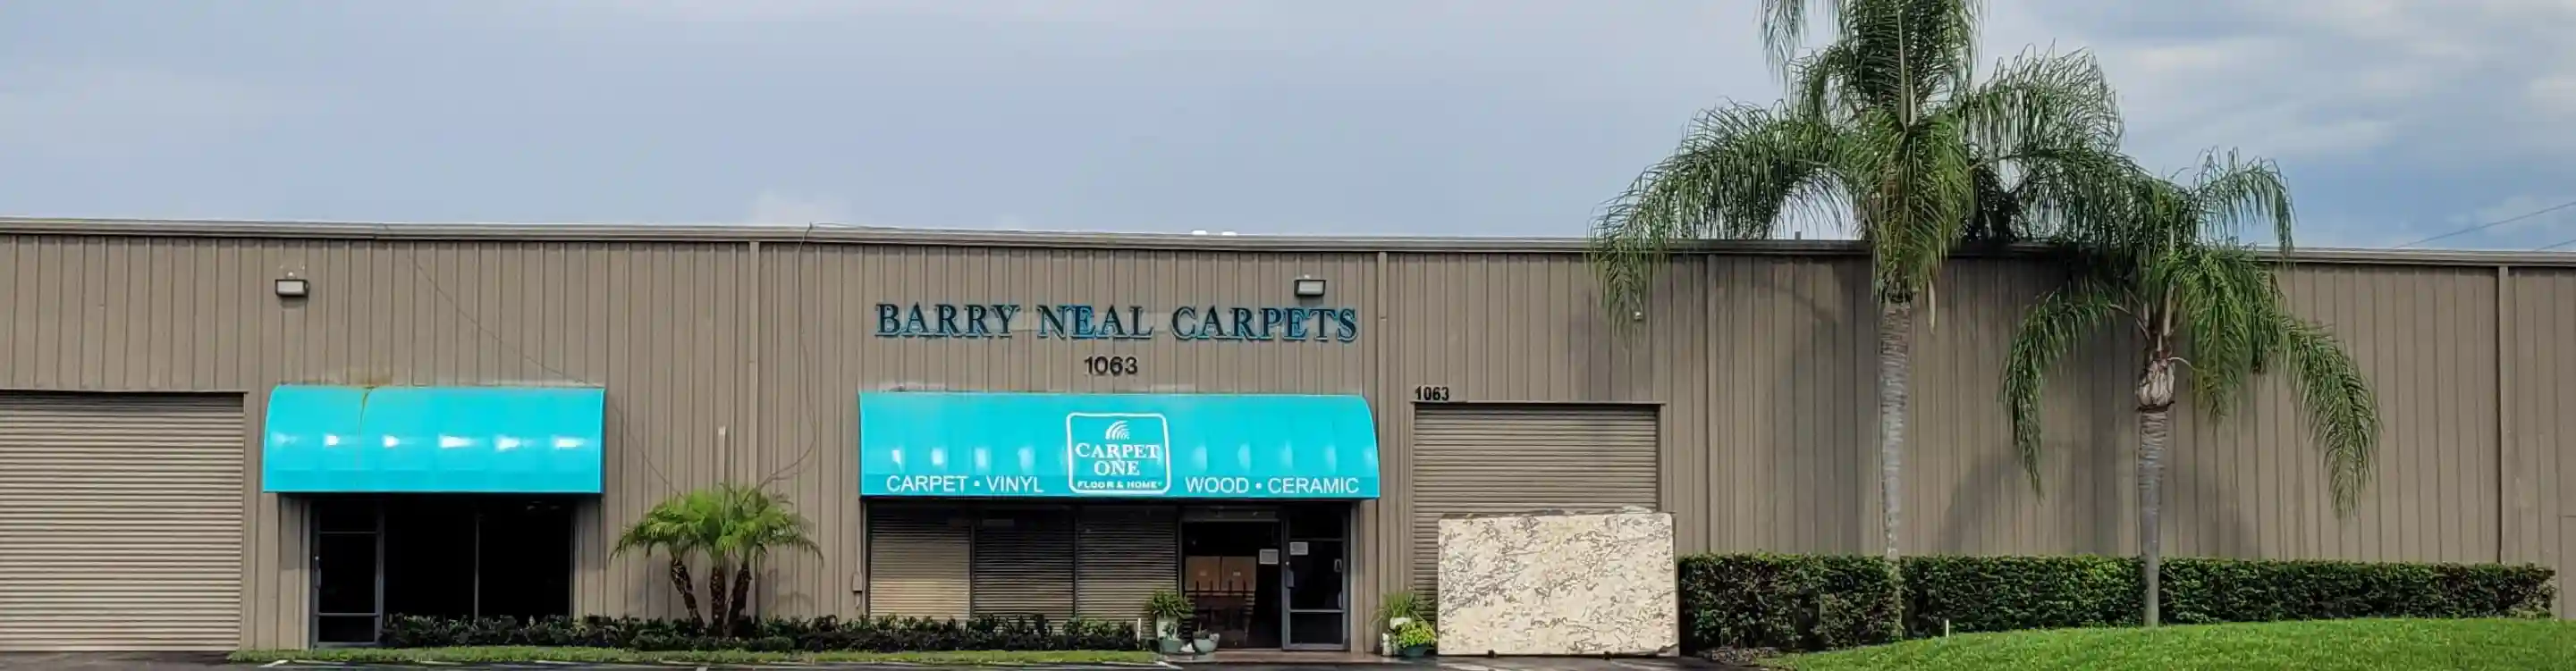 Barry Neal Carpet One storefront